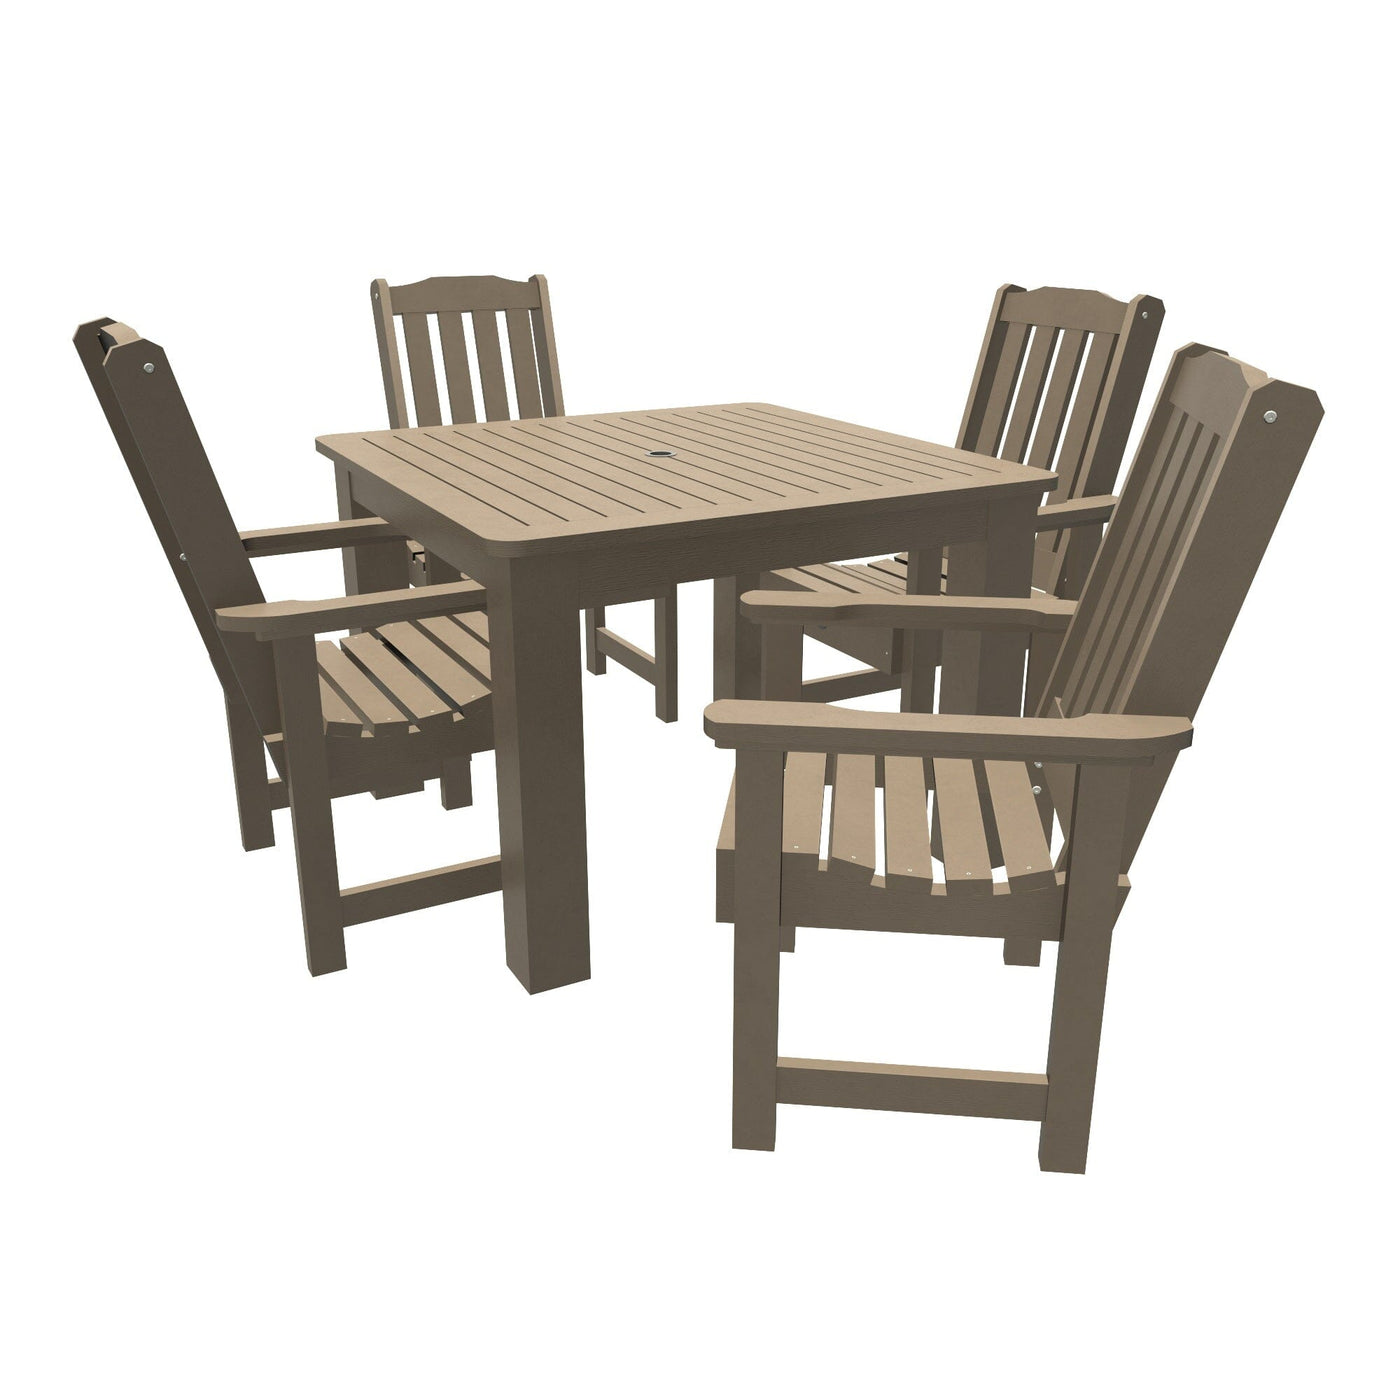 Lehigh 5pc Square Dining Set 42in x 42in - Dining Height Dining Highwood USA Woodland Brown 